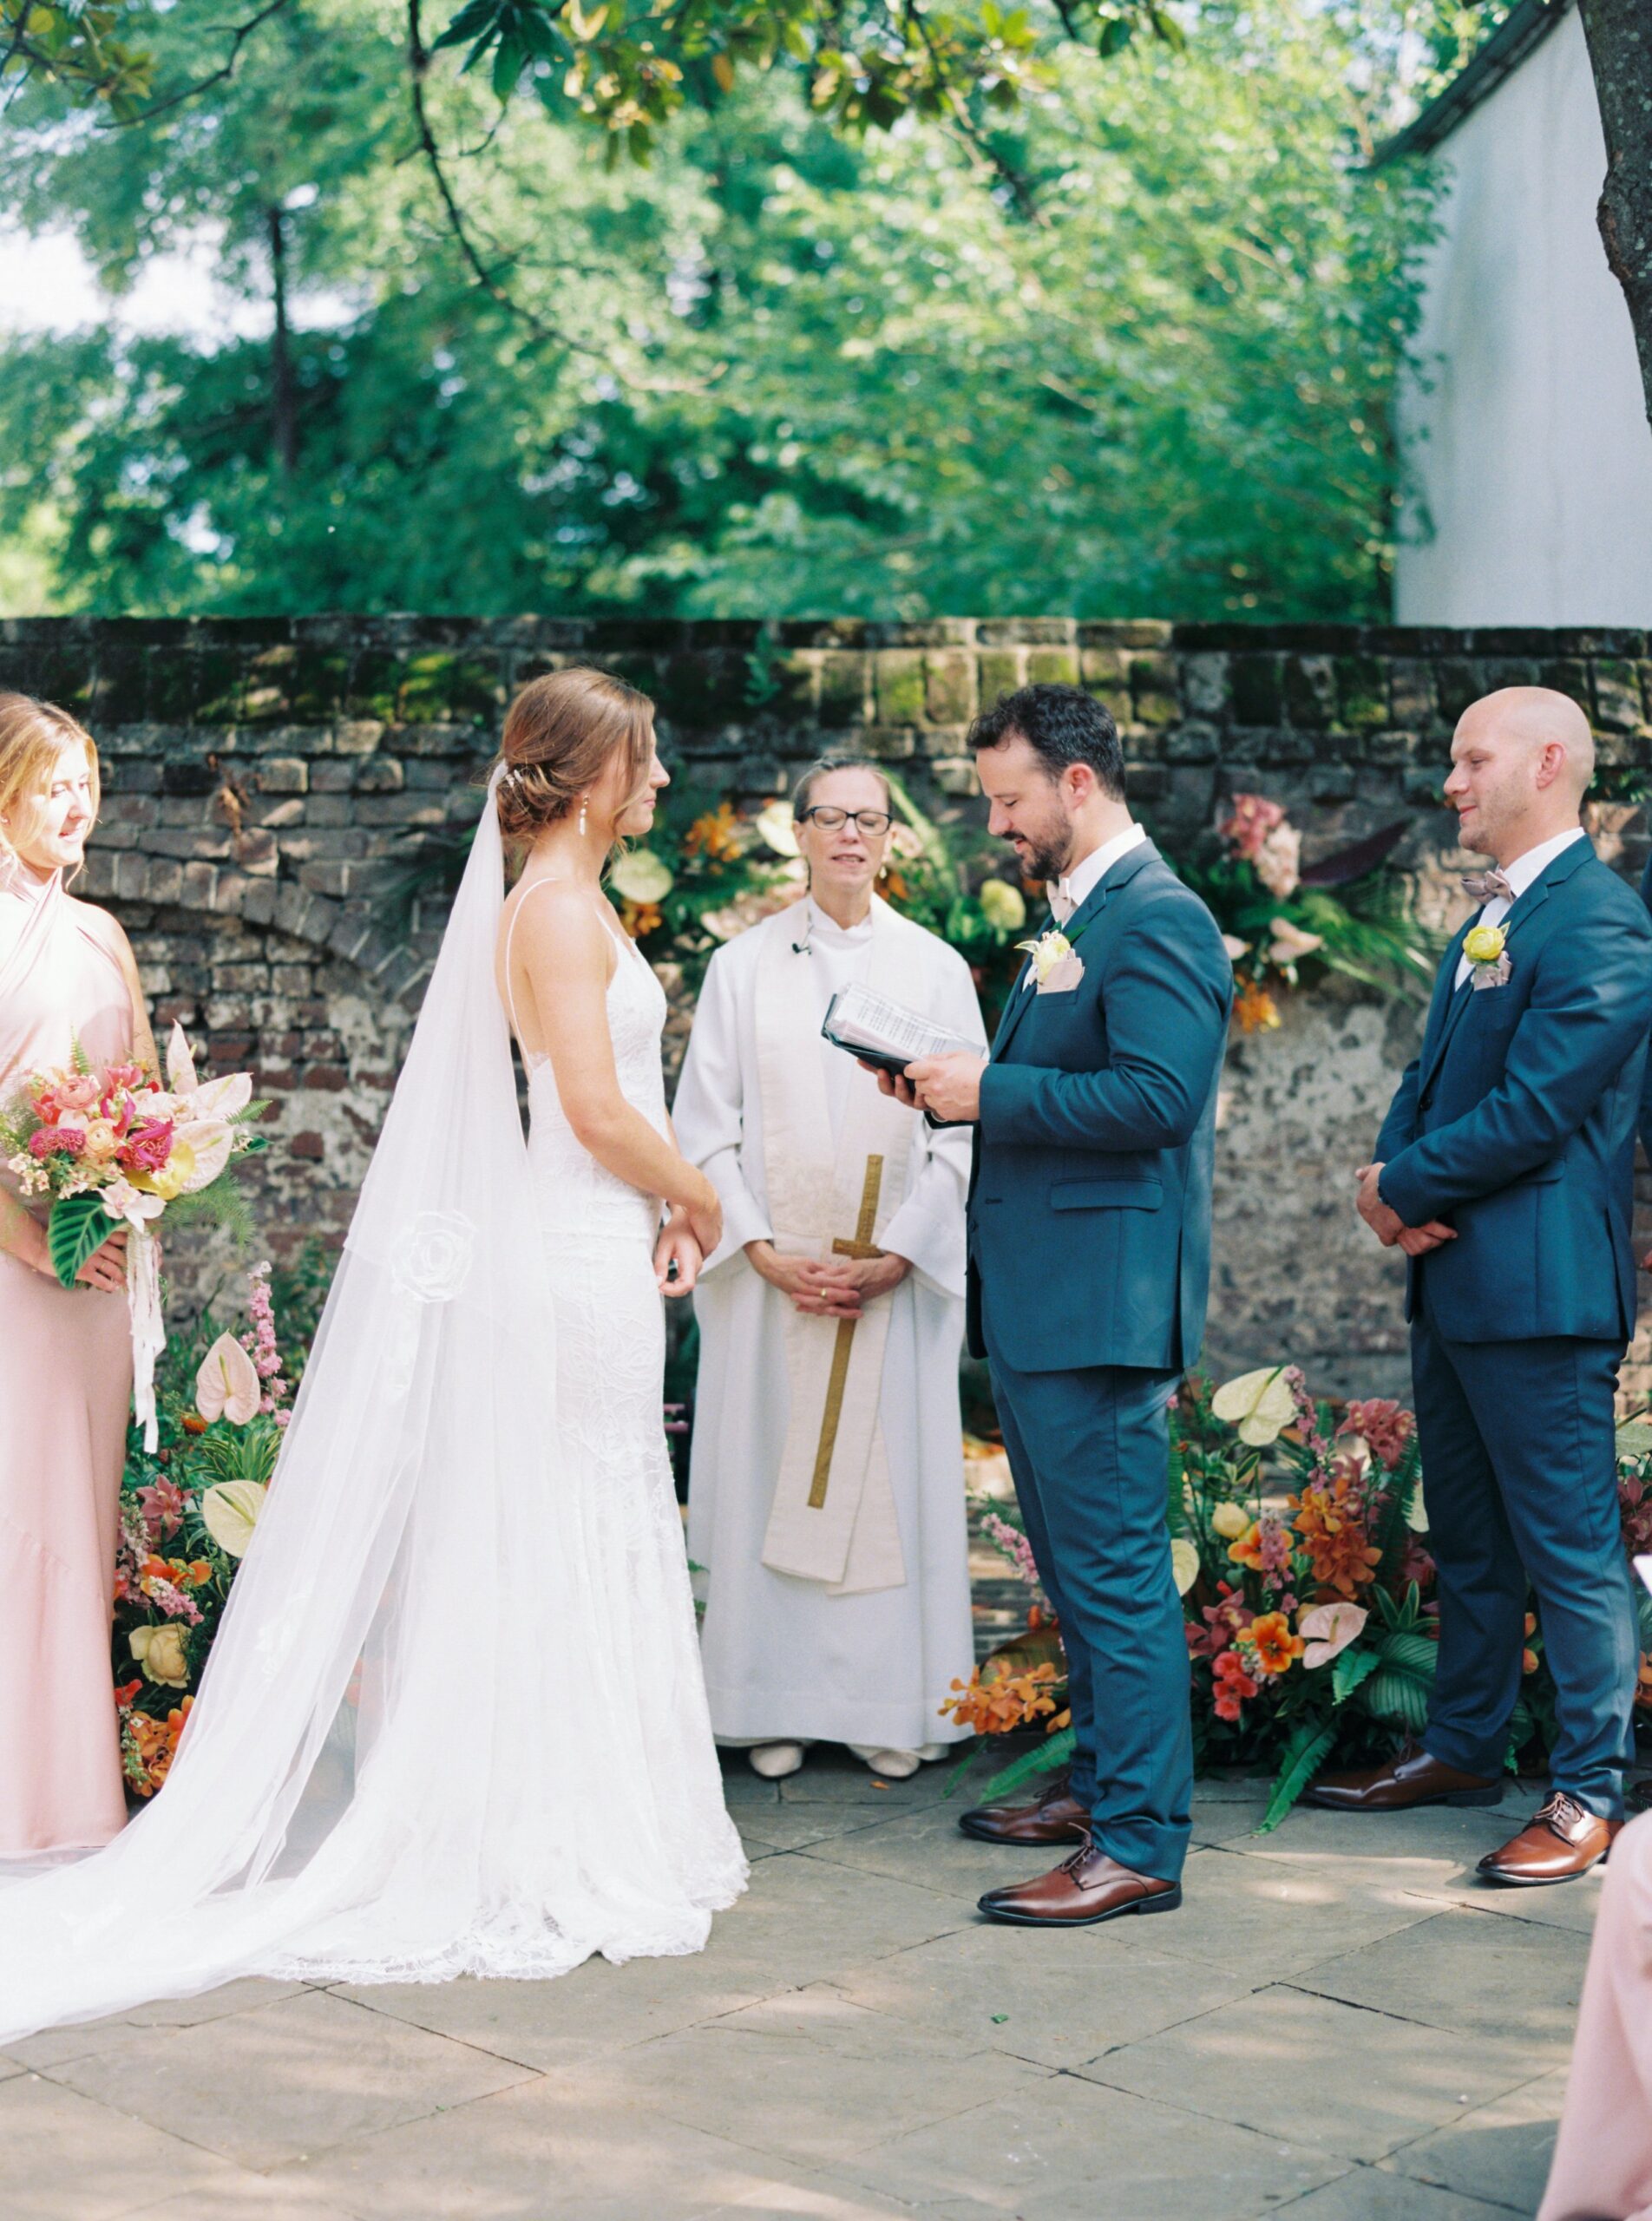 Groom reads vows to bride during outdoor wedding.